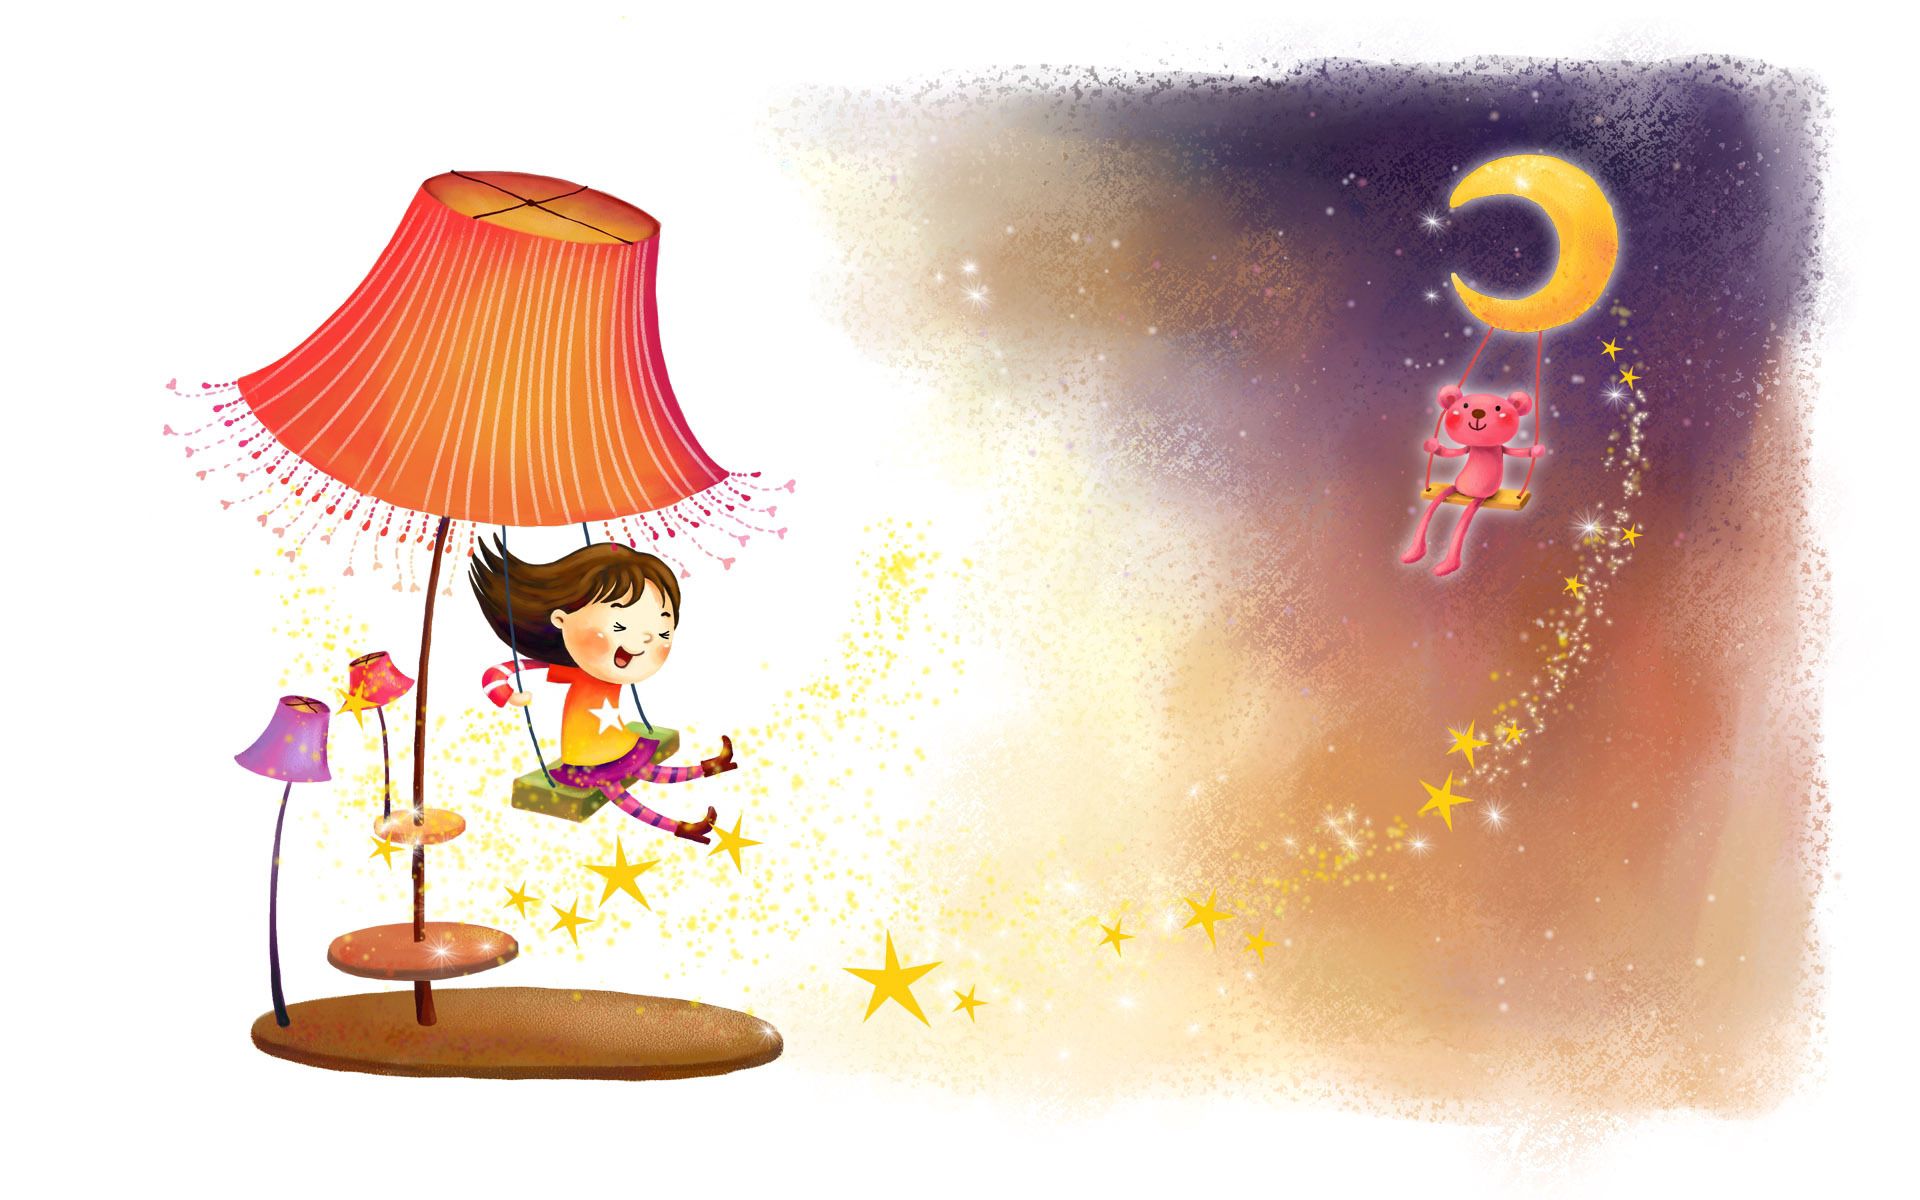 lamp, fantasy, stars, miscellanea, miscellaneous, picture, drawing, girl, animal, beast, swing, wind, childhood, laugh, laughter